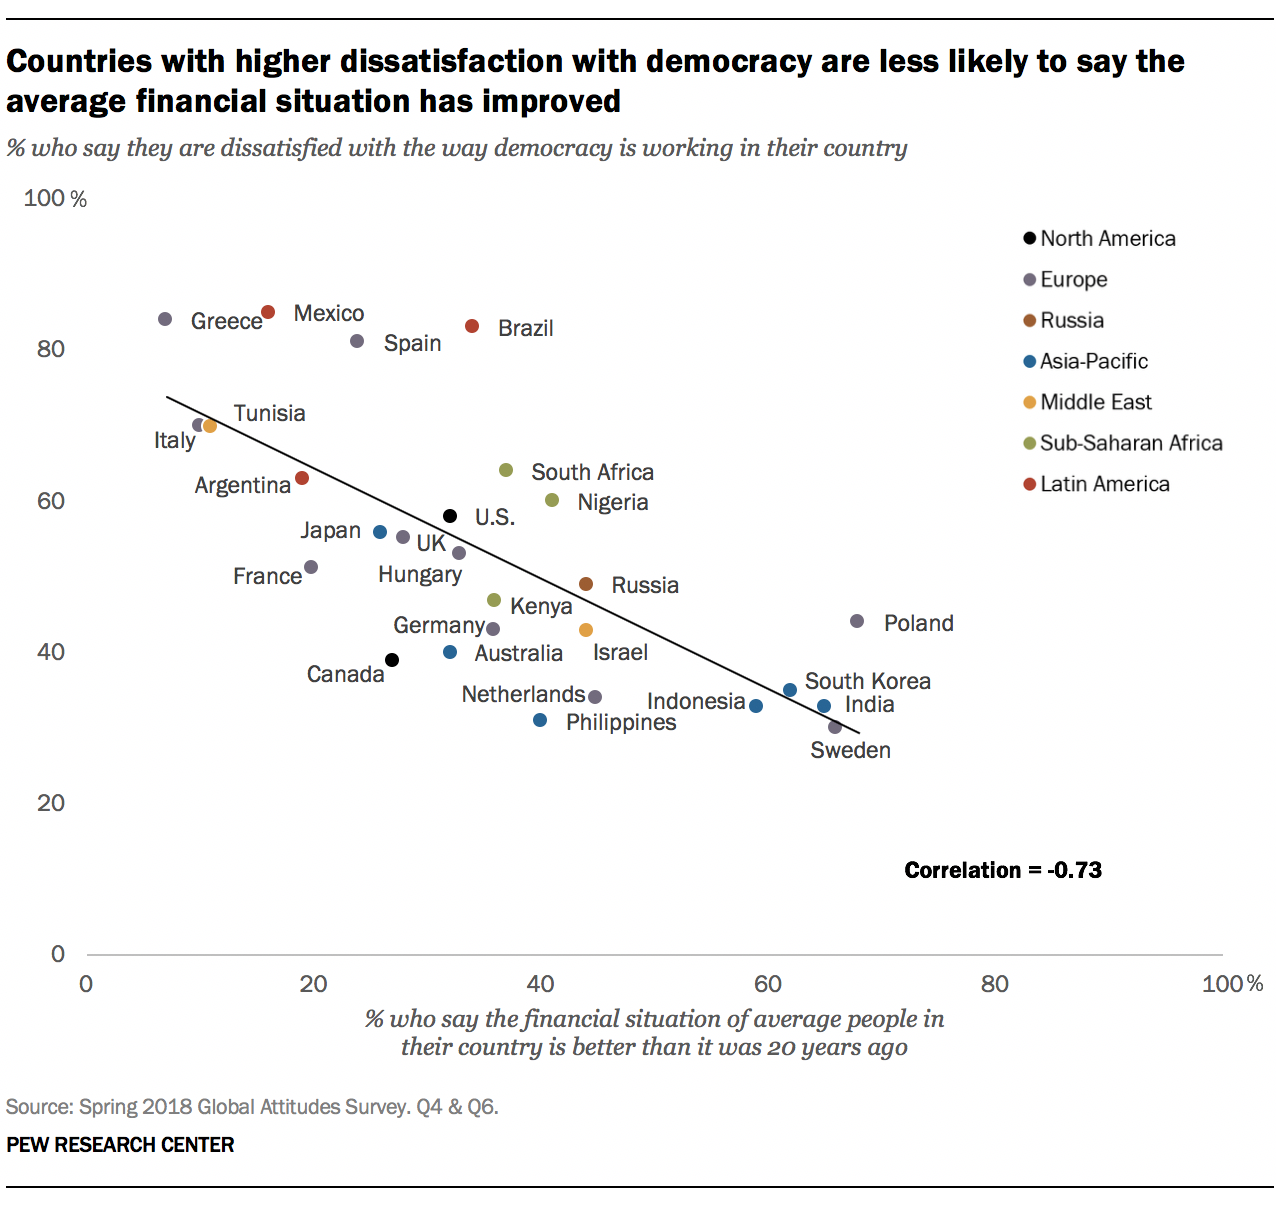 Countries with higher dissatisfaction with democracy are less likely to say the average financial situation has improved